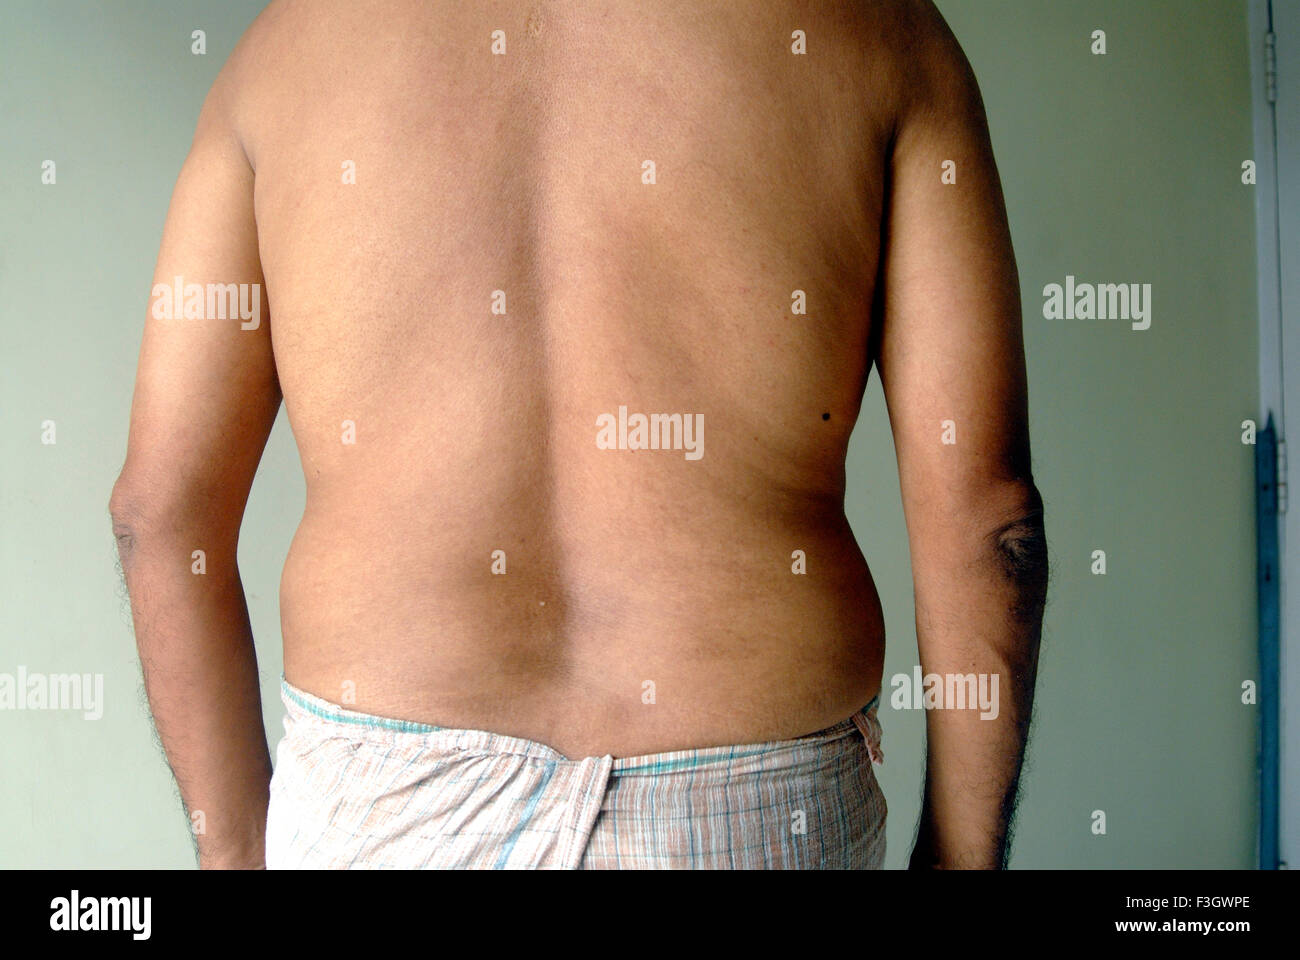 Obese fat bulky fleshy body of a man age around 50 ; India Stock Photo